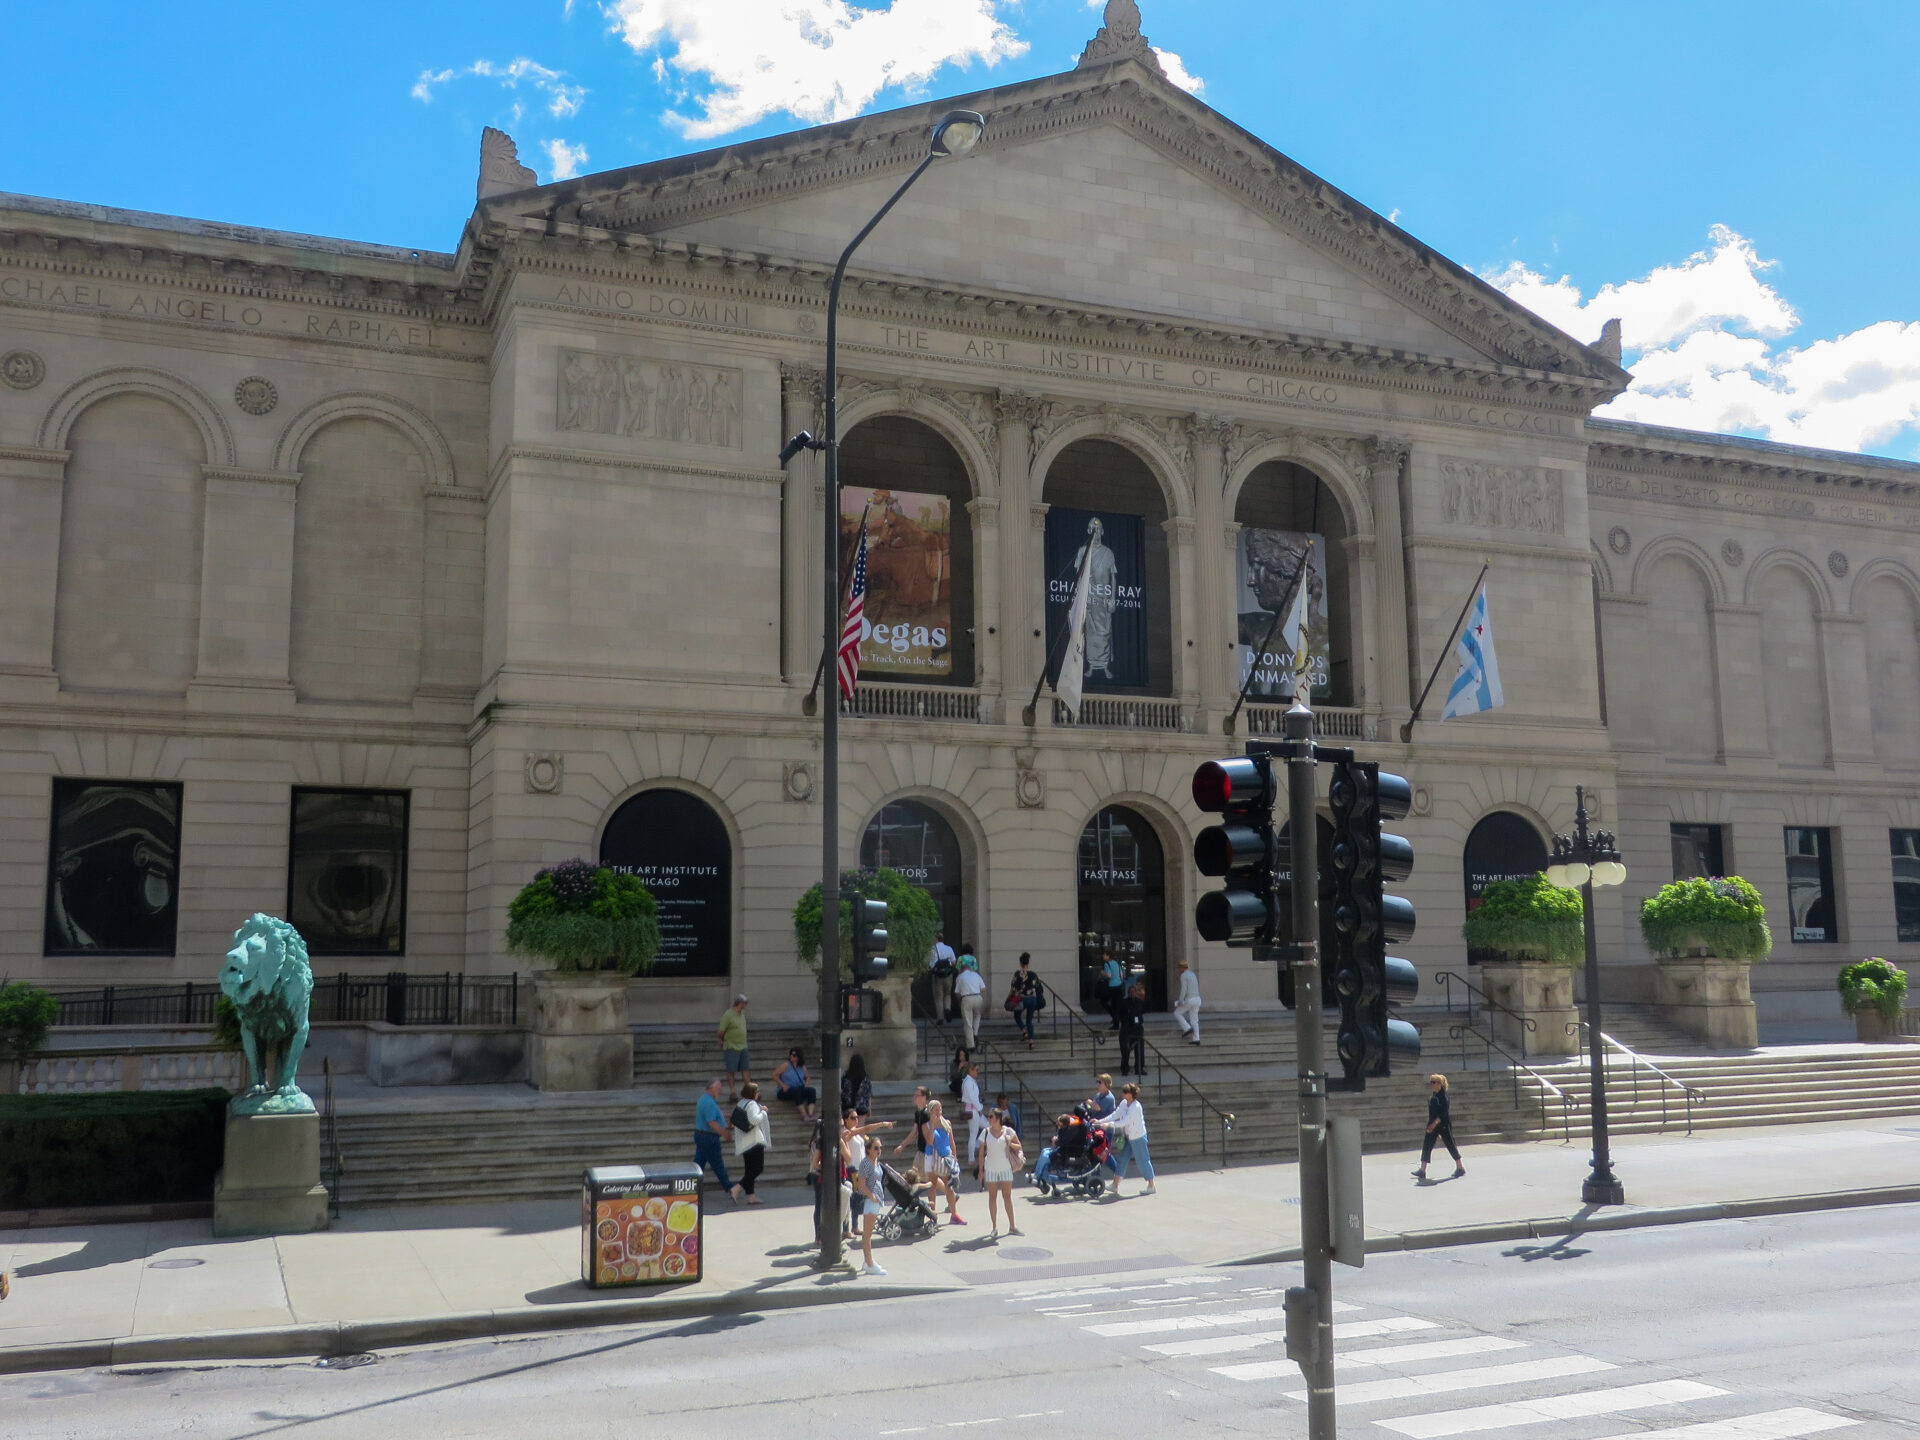 The Art Institute of Chicago is a must don your Chicago Itinerary